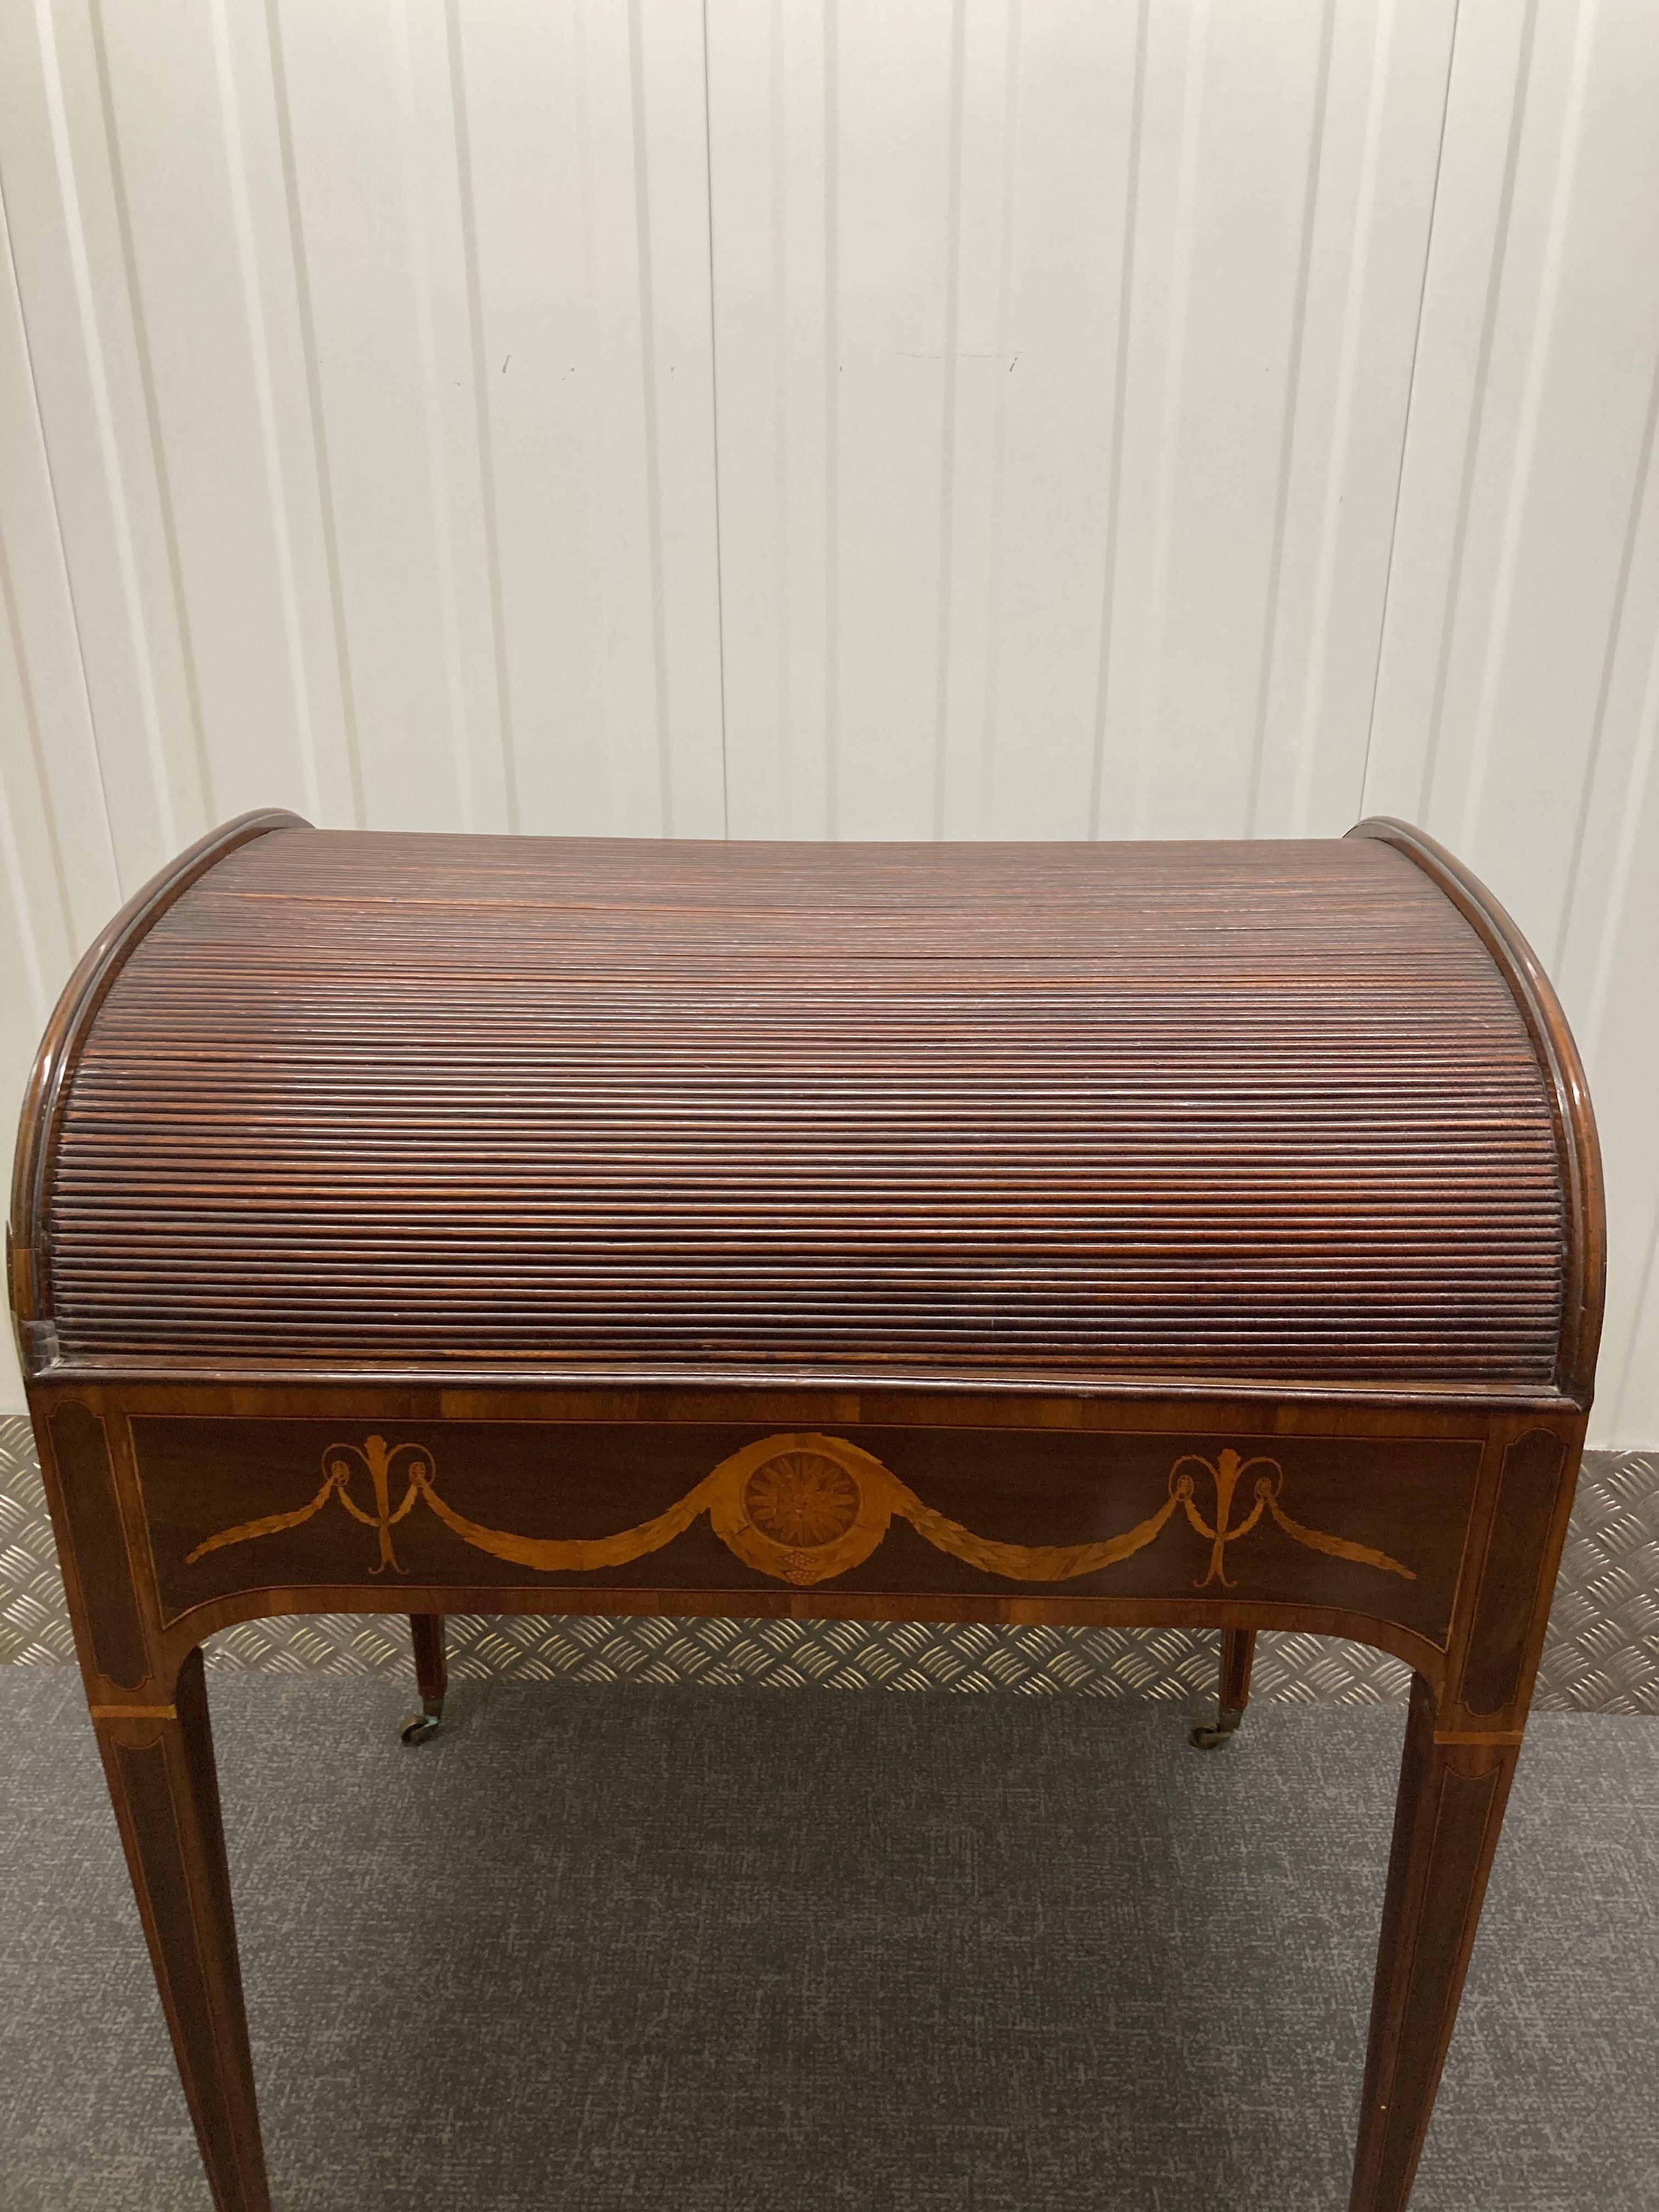 Sheraton Period Partridgewood Tambour Desk In Good Condition For Sale In Maidstone, GB